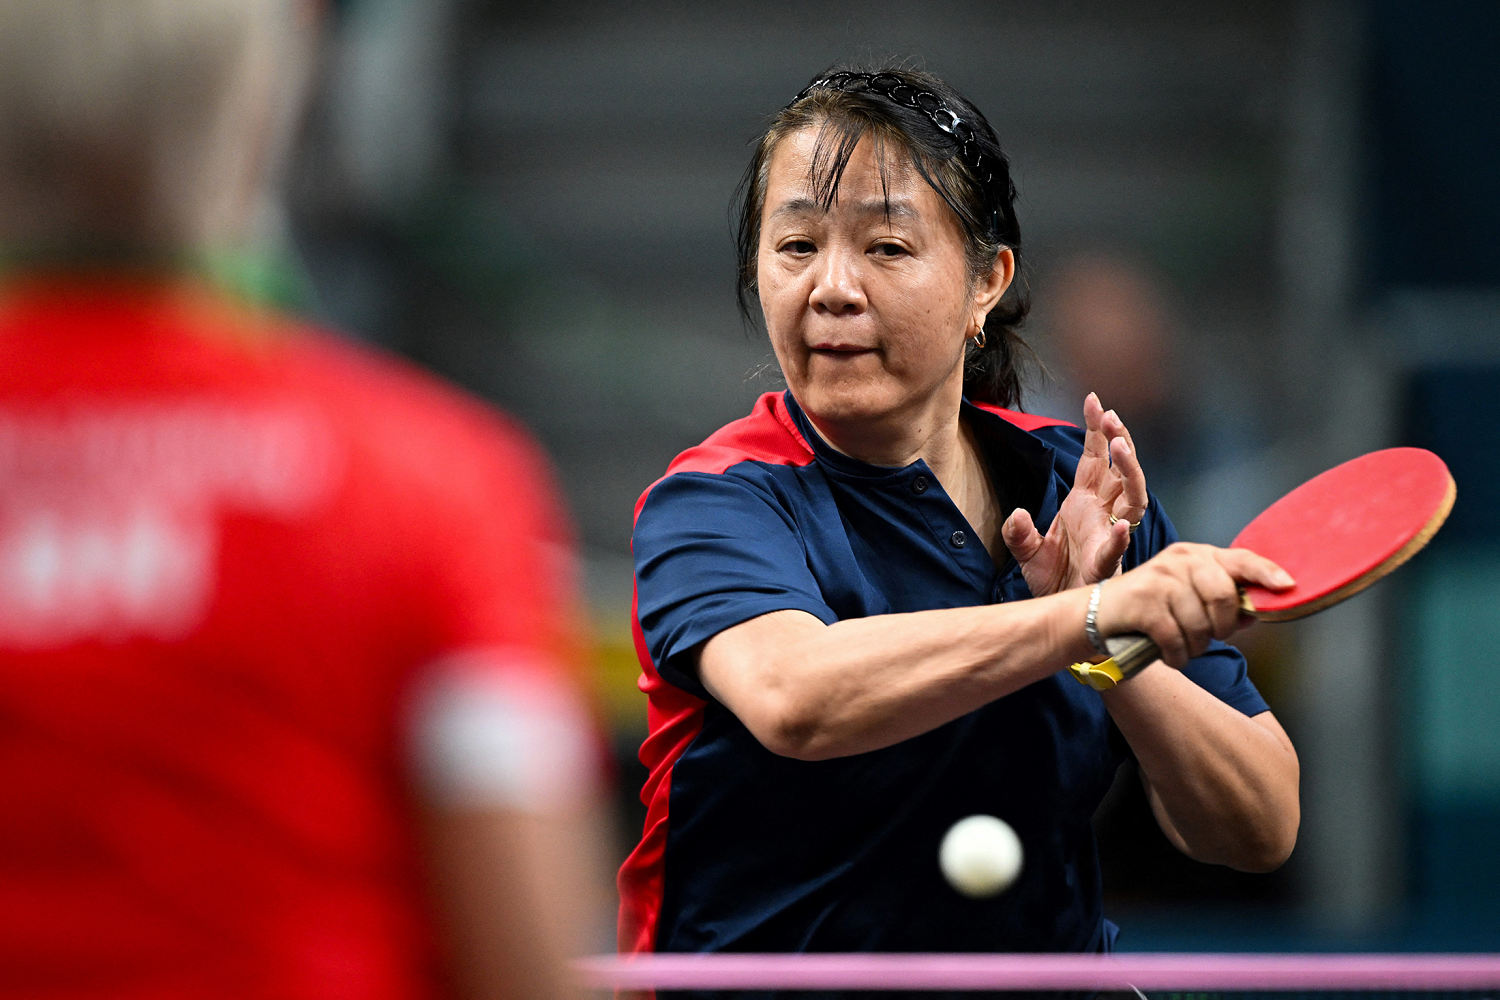 'Table Tennis Grandma' who made Olympic debut at 58 says her dream came true despite loss